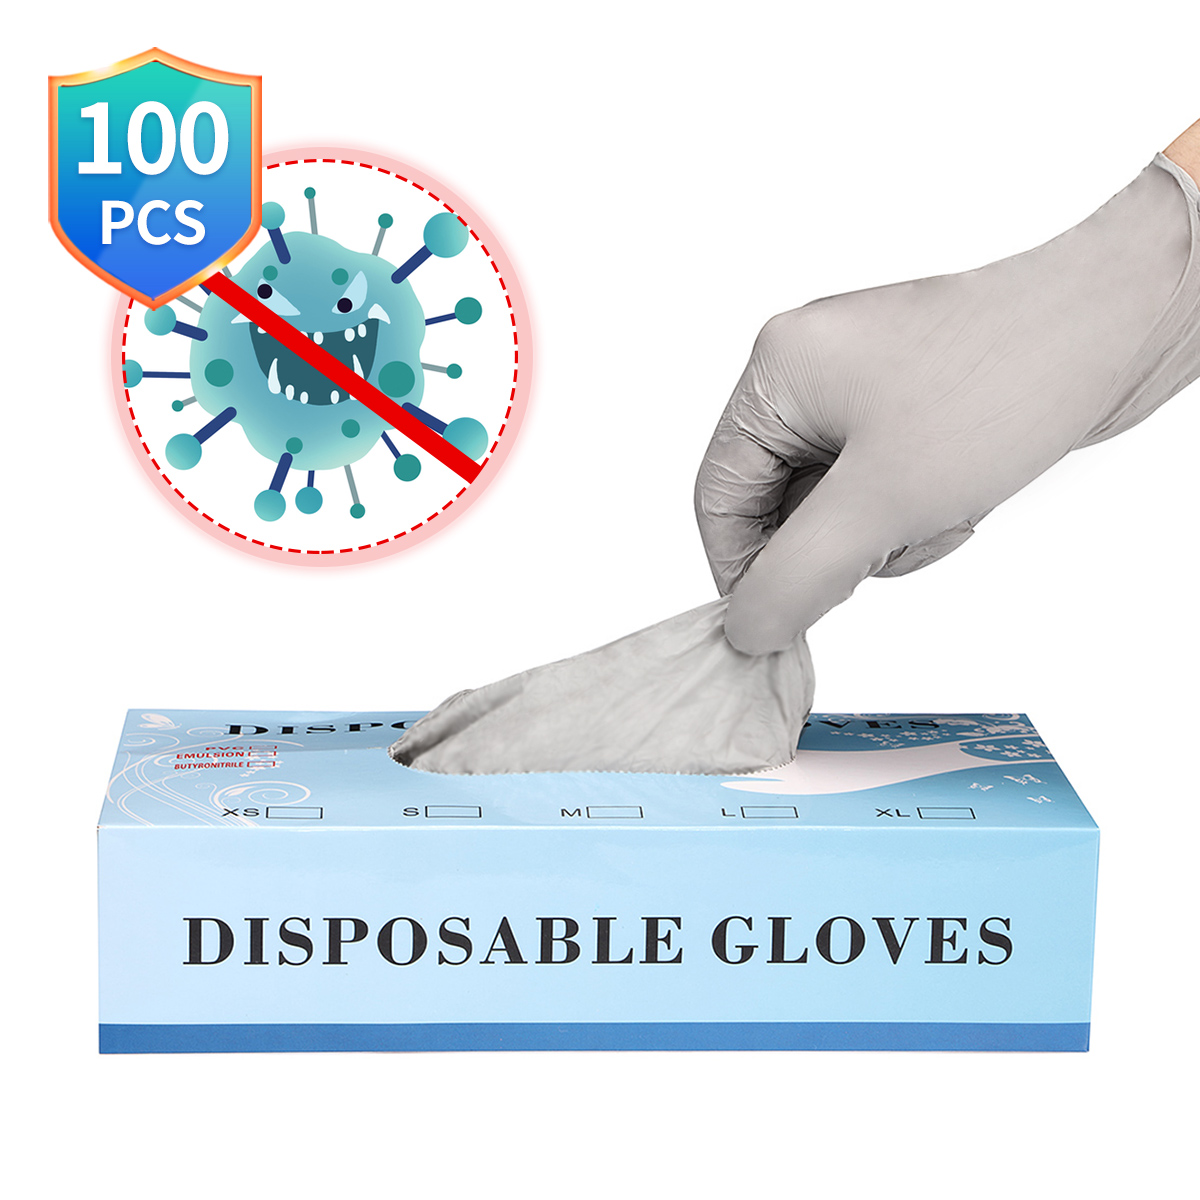 SML-100Pcs-Disposable-Gloves-Nitrile-Free-Sterile-Glove-for-Picnic-Food-Cleaning-1671436-1